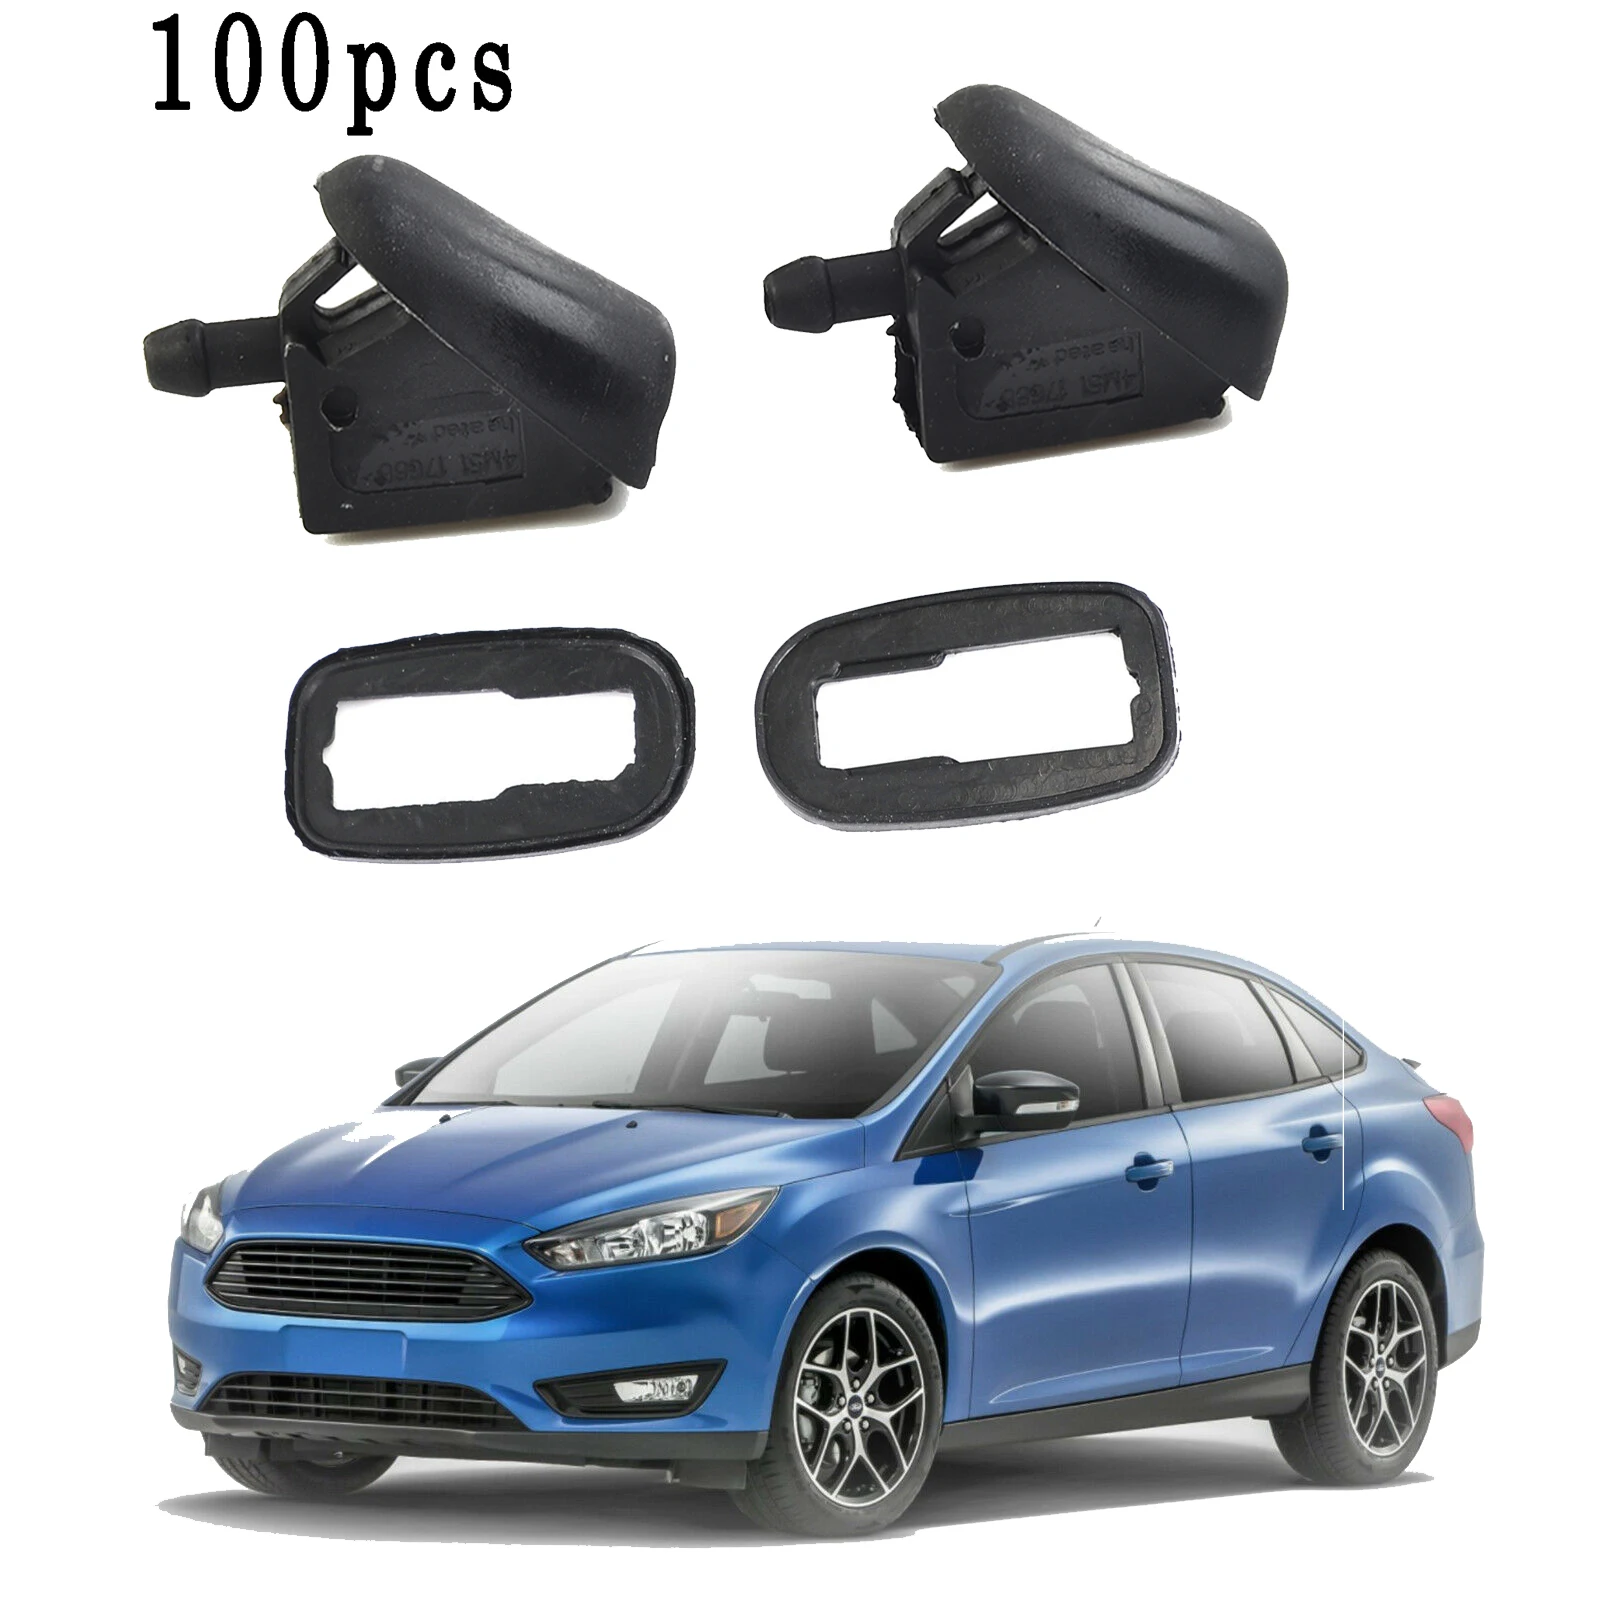 

100Pcs Car Windscreen Wiper Spray With 100Pcs Jet Nozzle Washer Gasket For Ford Fiestaa Windshield Wiper Washer Spray Nozzle